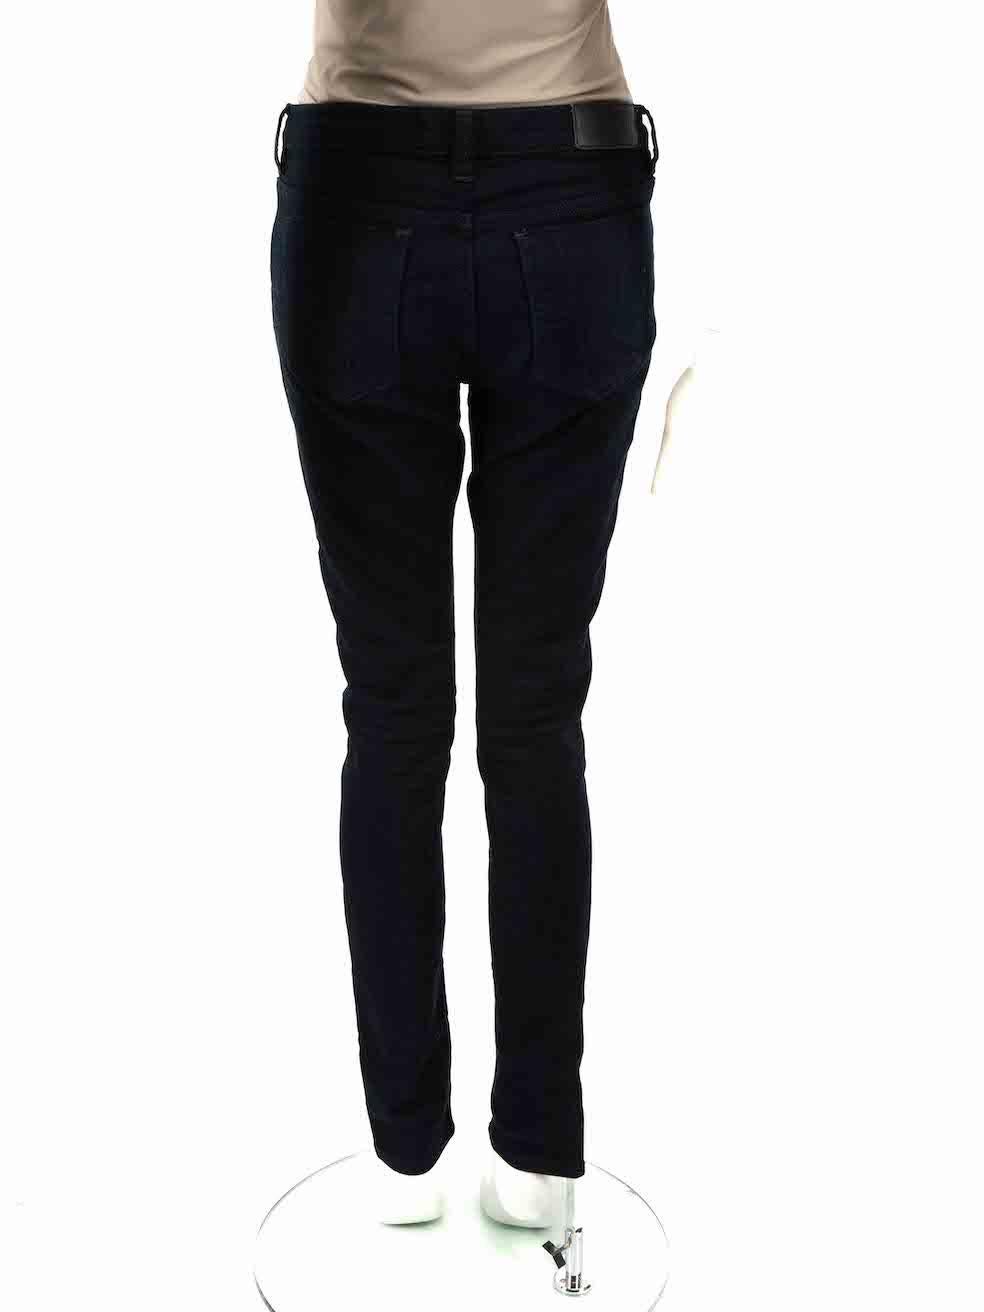 Victoria Beckham Victoria Beckham Jeans Blue Denim Mid-Rise Skinny Jeans Size M In Excellent Condition For Sale In London, GB